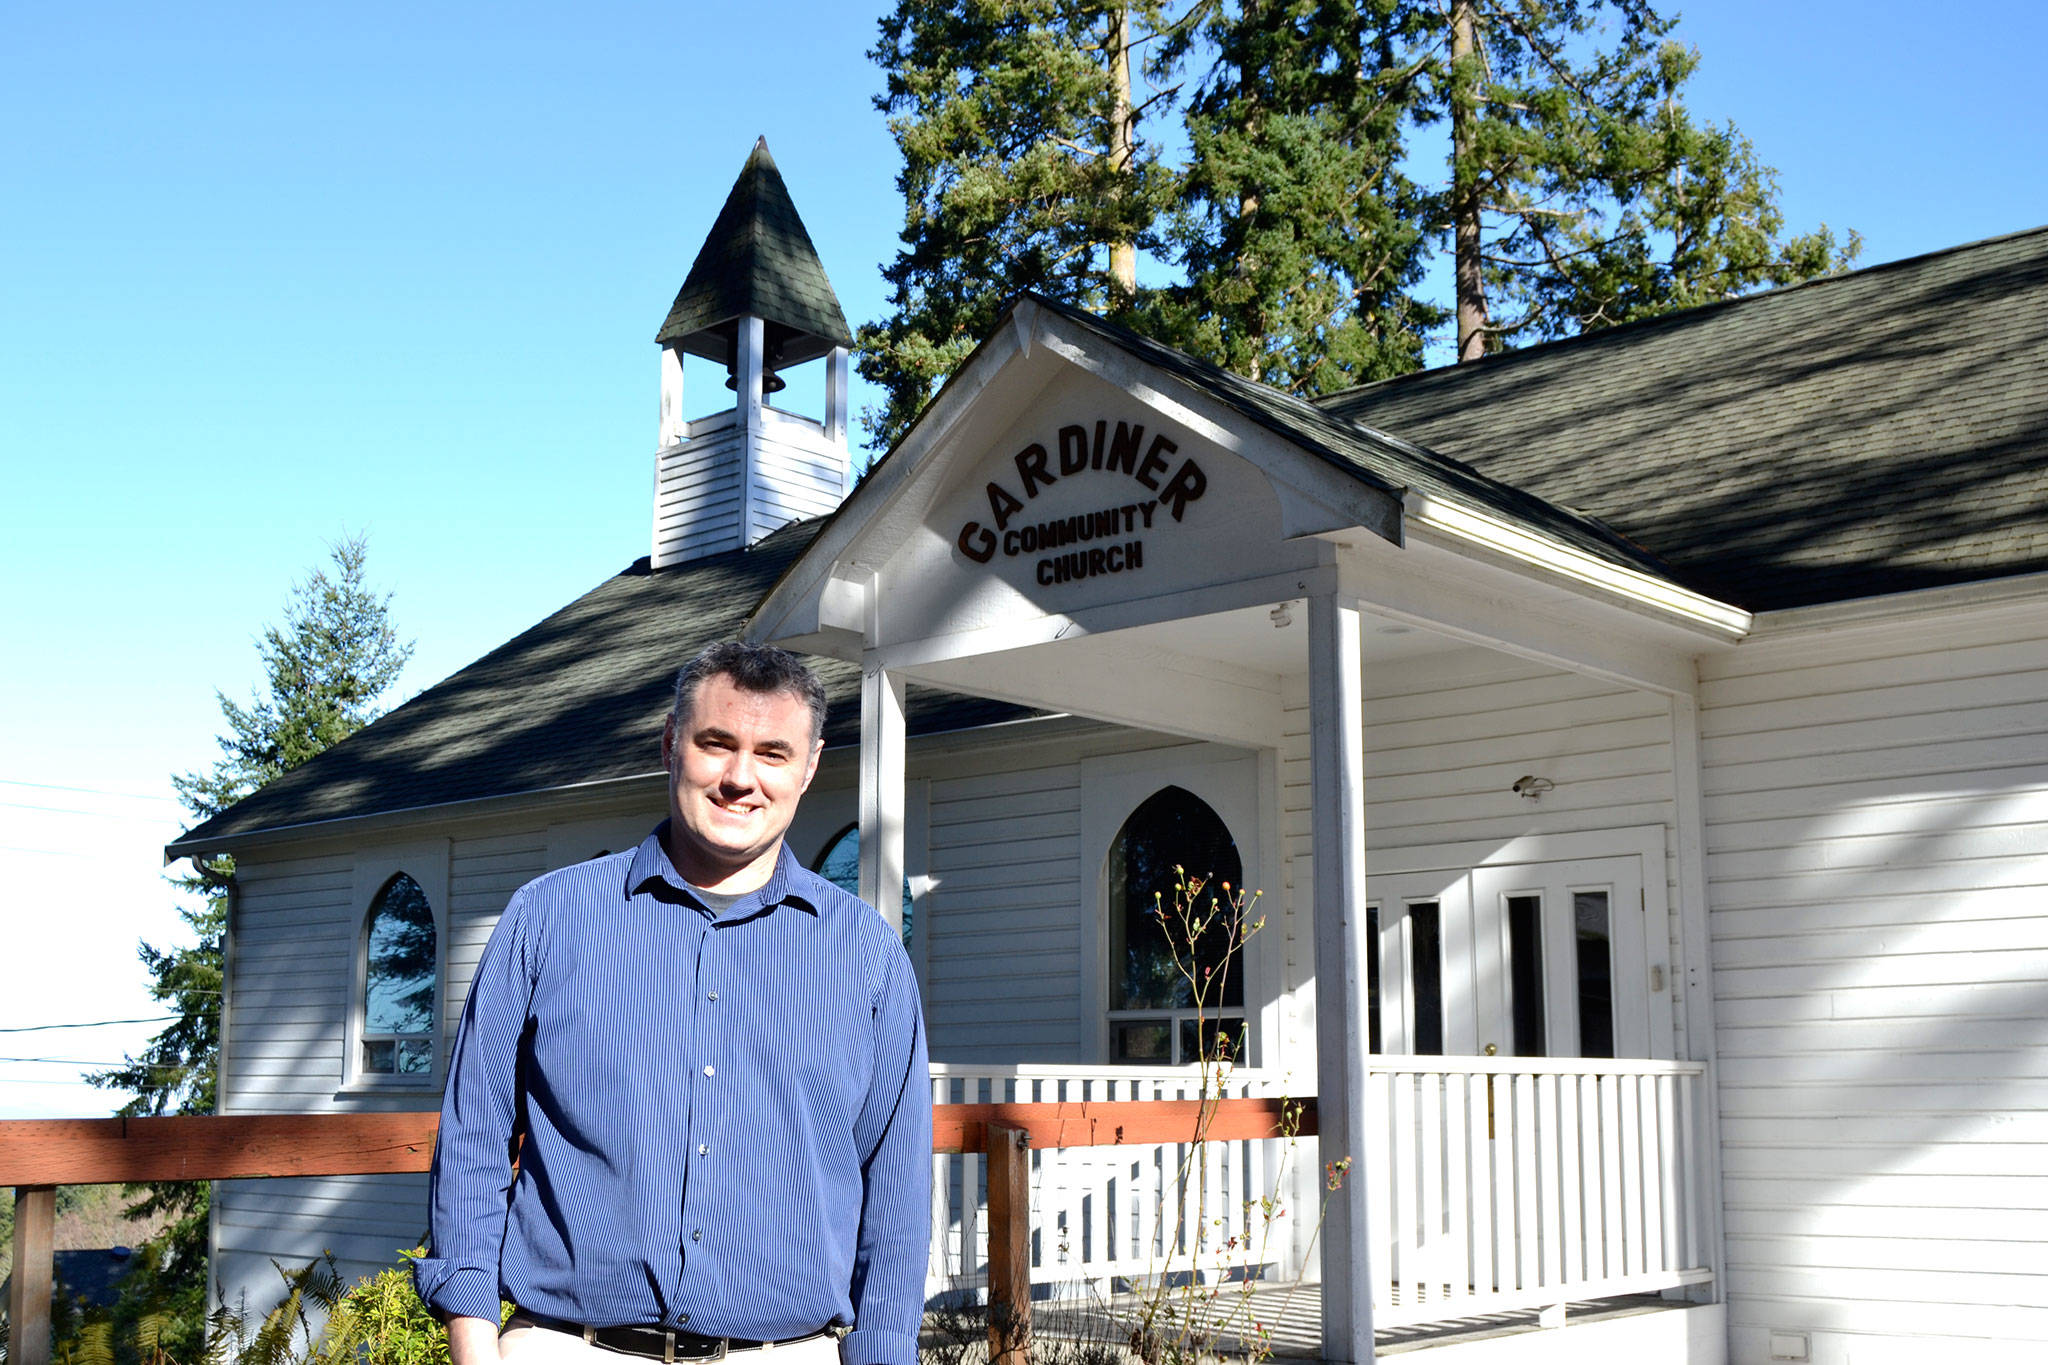 Caleb Smith recently started as the new pastor at Gardiner Community Church after seven years at an Illinois church. Smith said he and his wife were seeking a change of scenery and they fell in love with the people and Gardiner community. Sequim Gazette photo by Matthew Nash